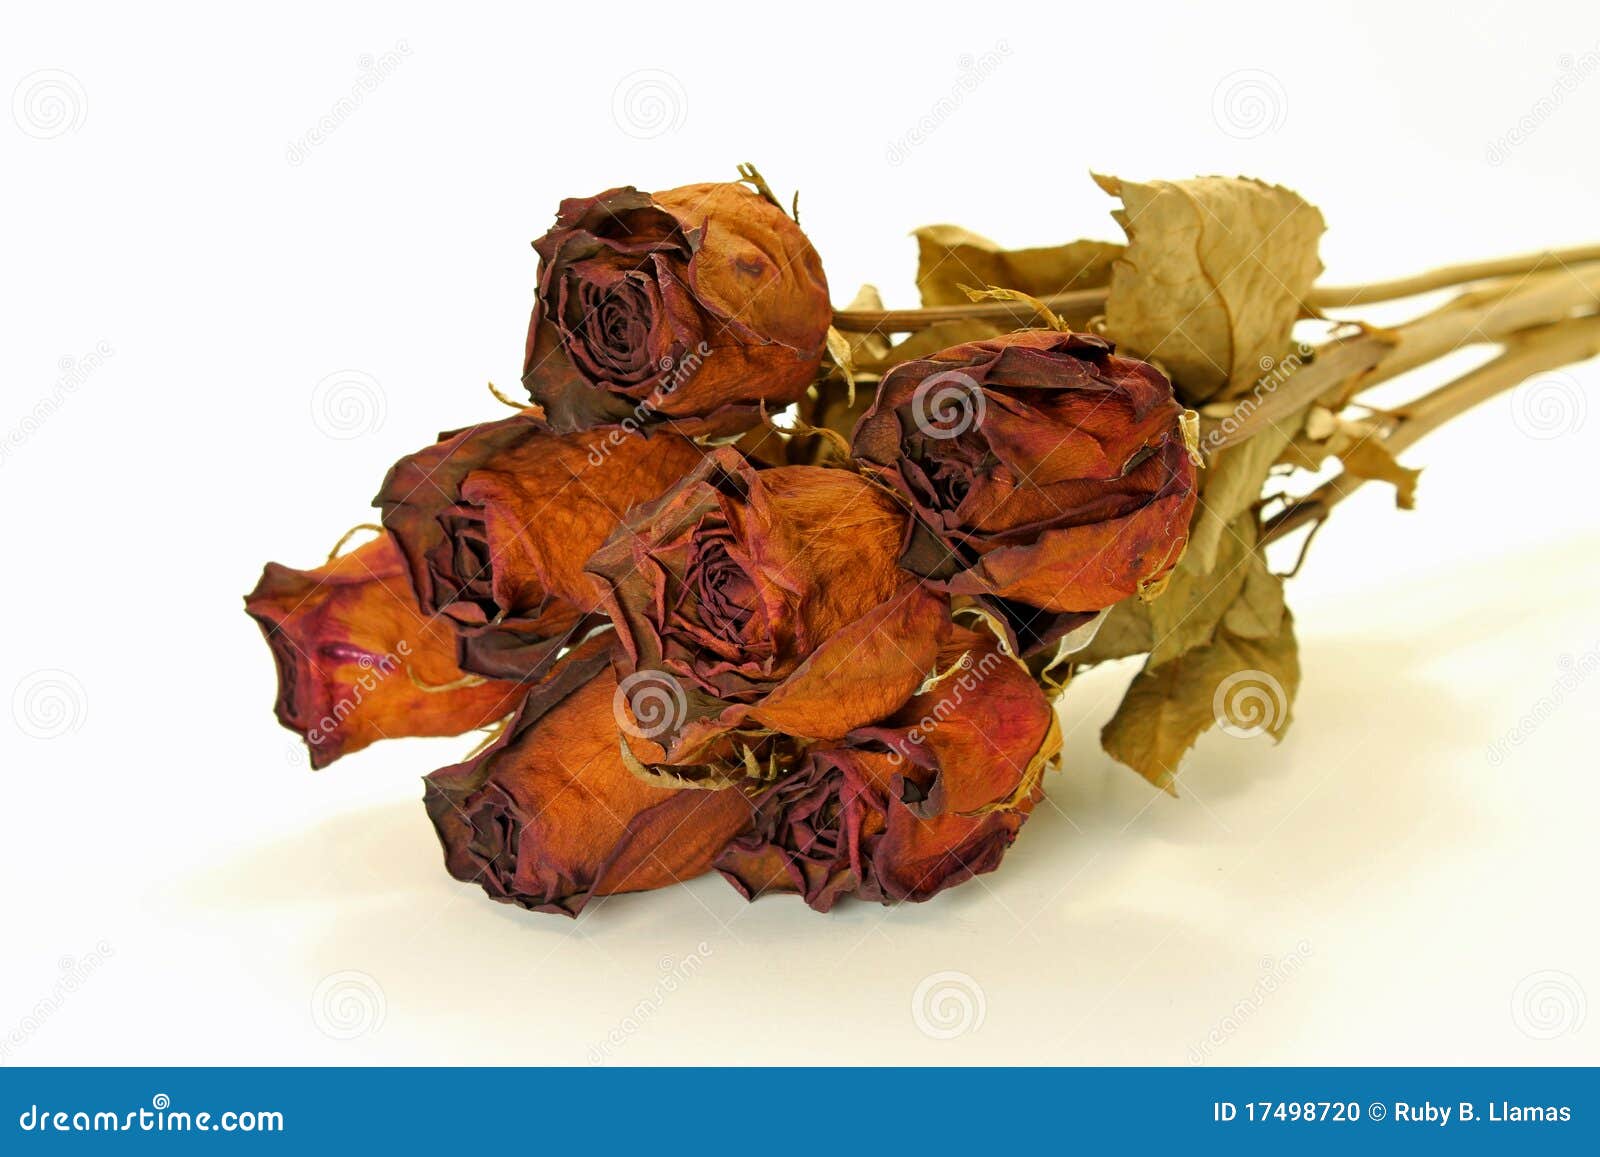 Dried Roses stock photo. Image of decor, crafts, aging - 17498720